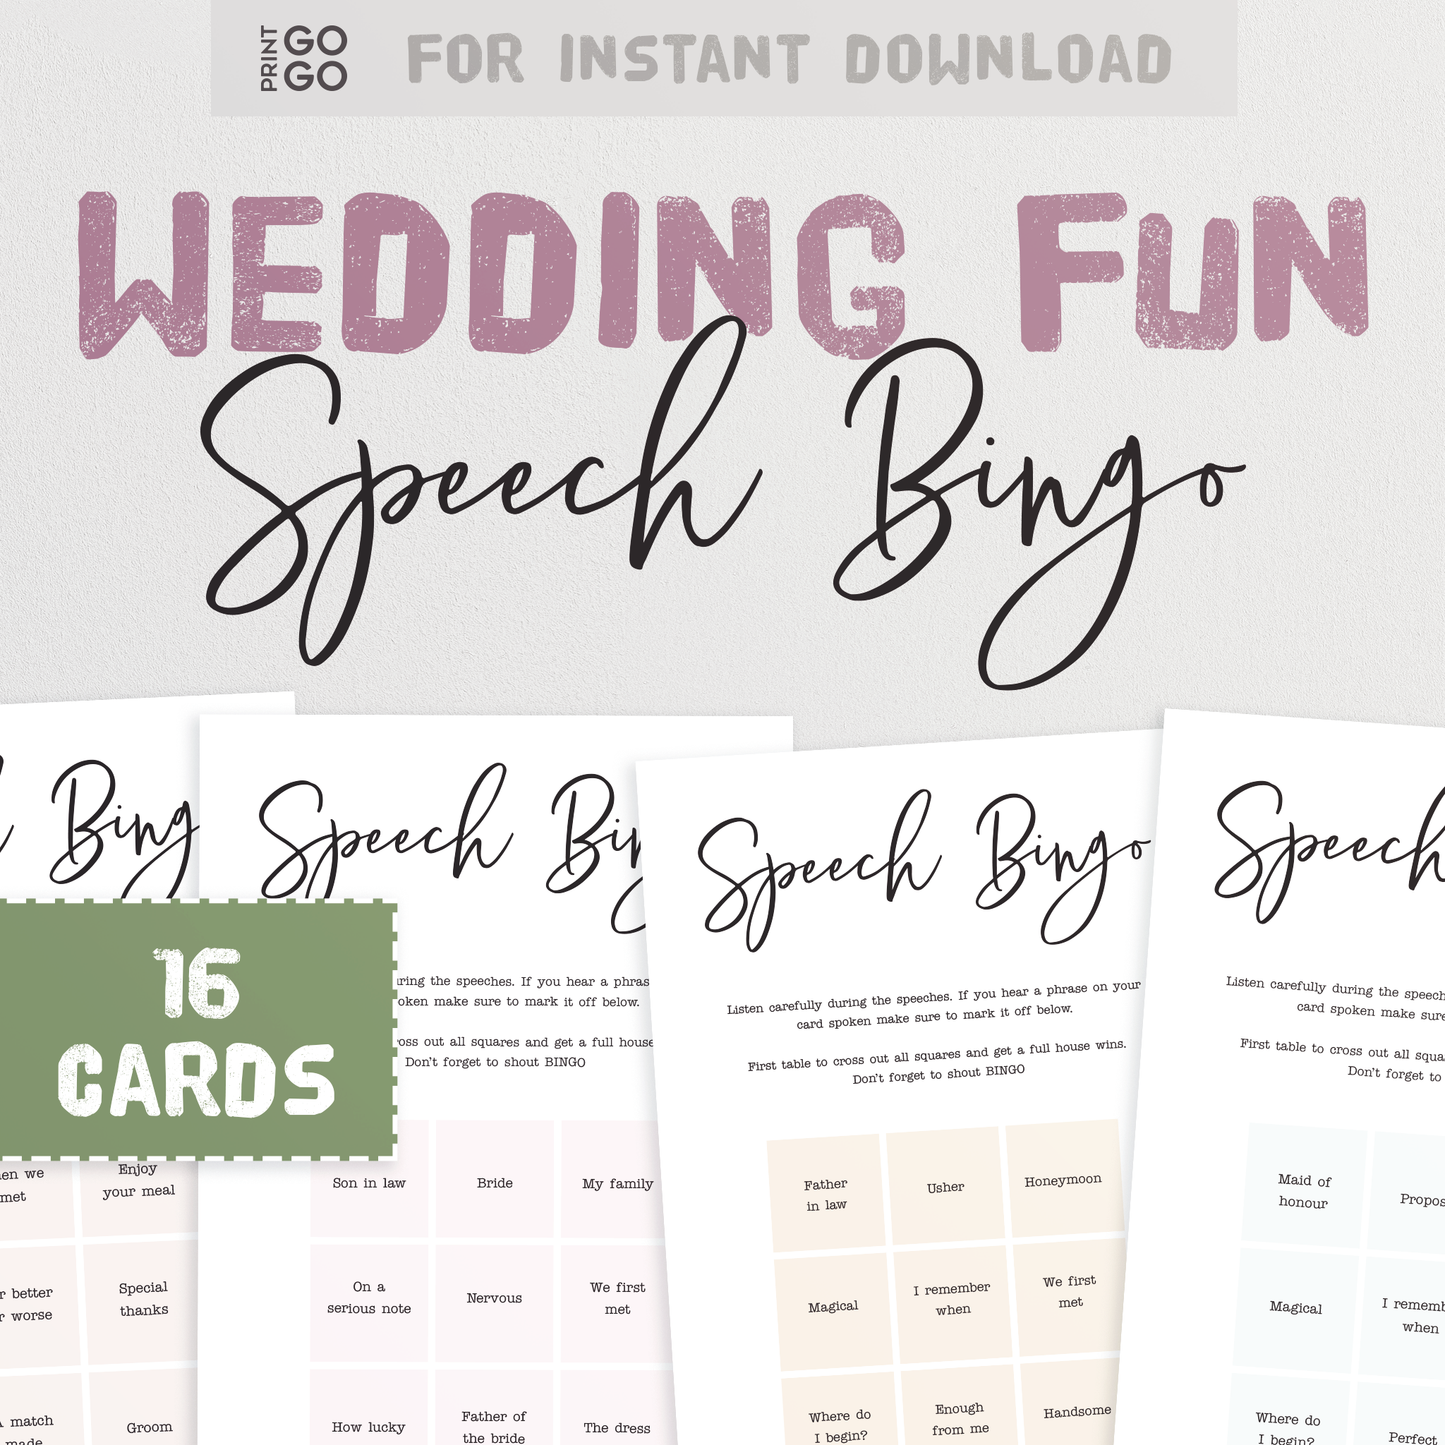 16 Wedding Speech Bingo Cards - An Ice Breaker Table Game for Guests